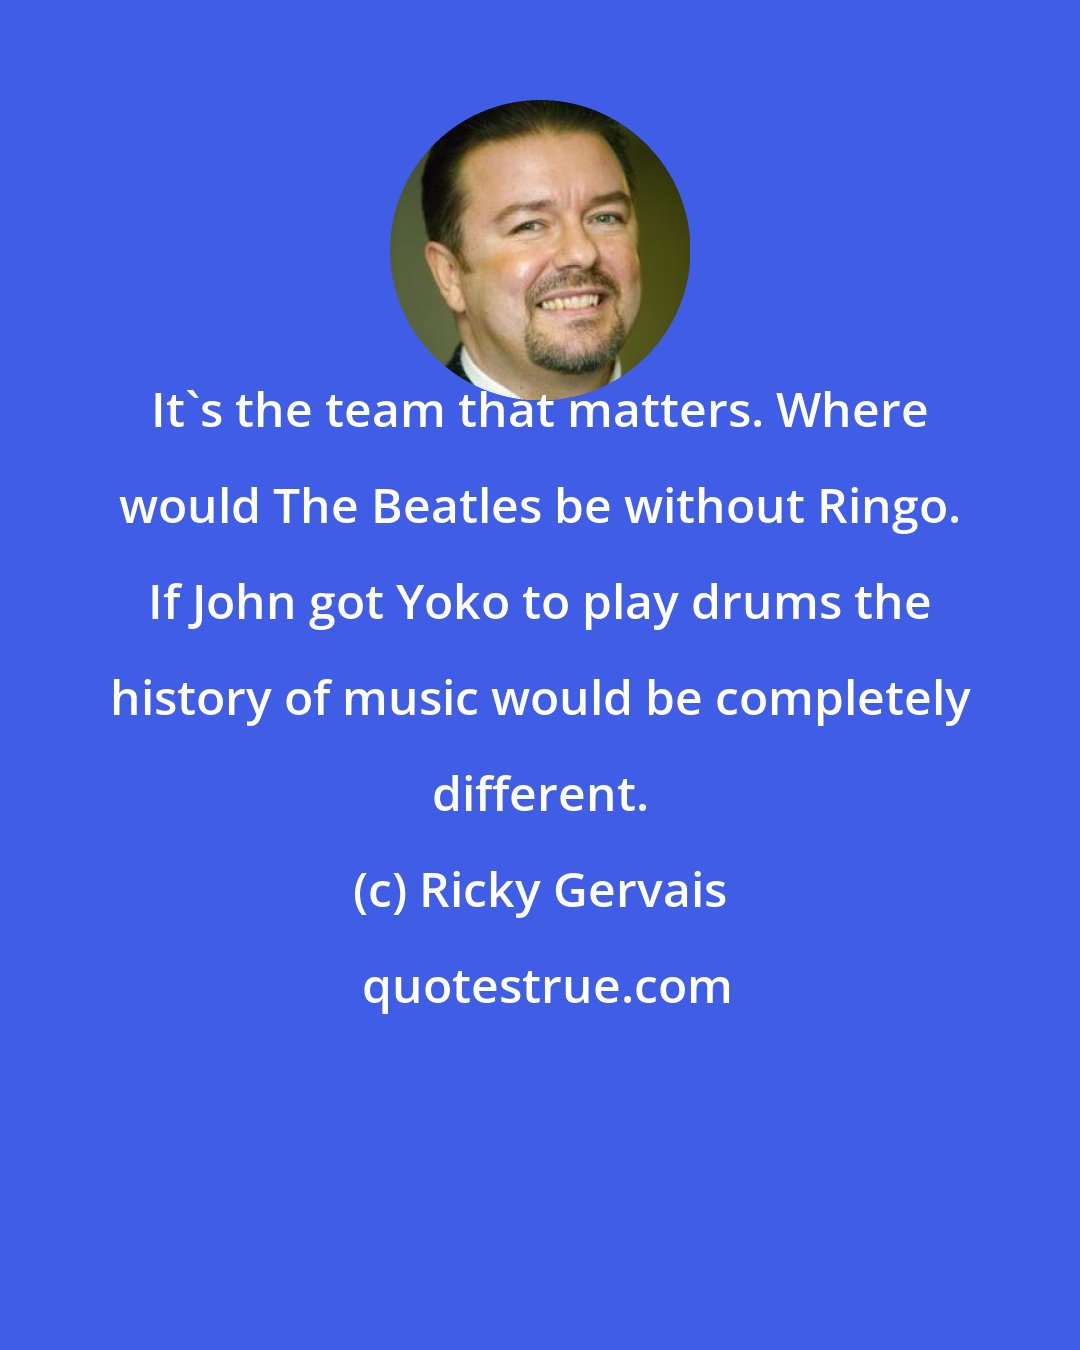 Ricky Gervais: It's the team that matters. Where would The Beatles be without Ringo. If John got Yoko to play drums the history of music would be completely different.